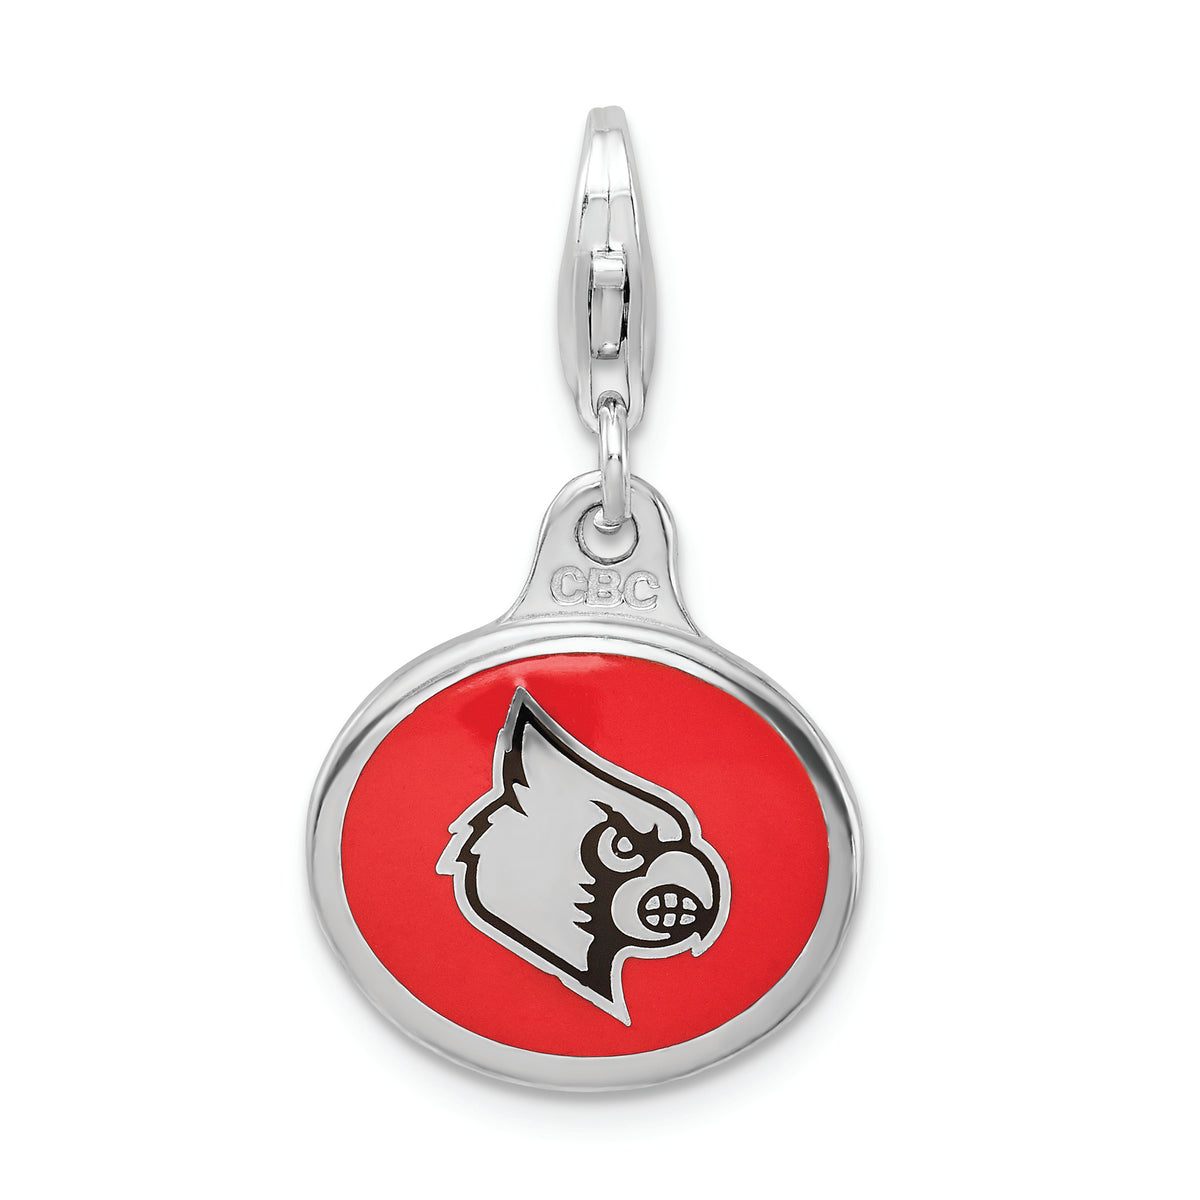 Amore La Vita Sterling Silver Rhodium-plated Polished Enameled University of Louisville Charm with Fancy Lobster Clasp